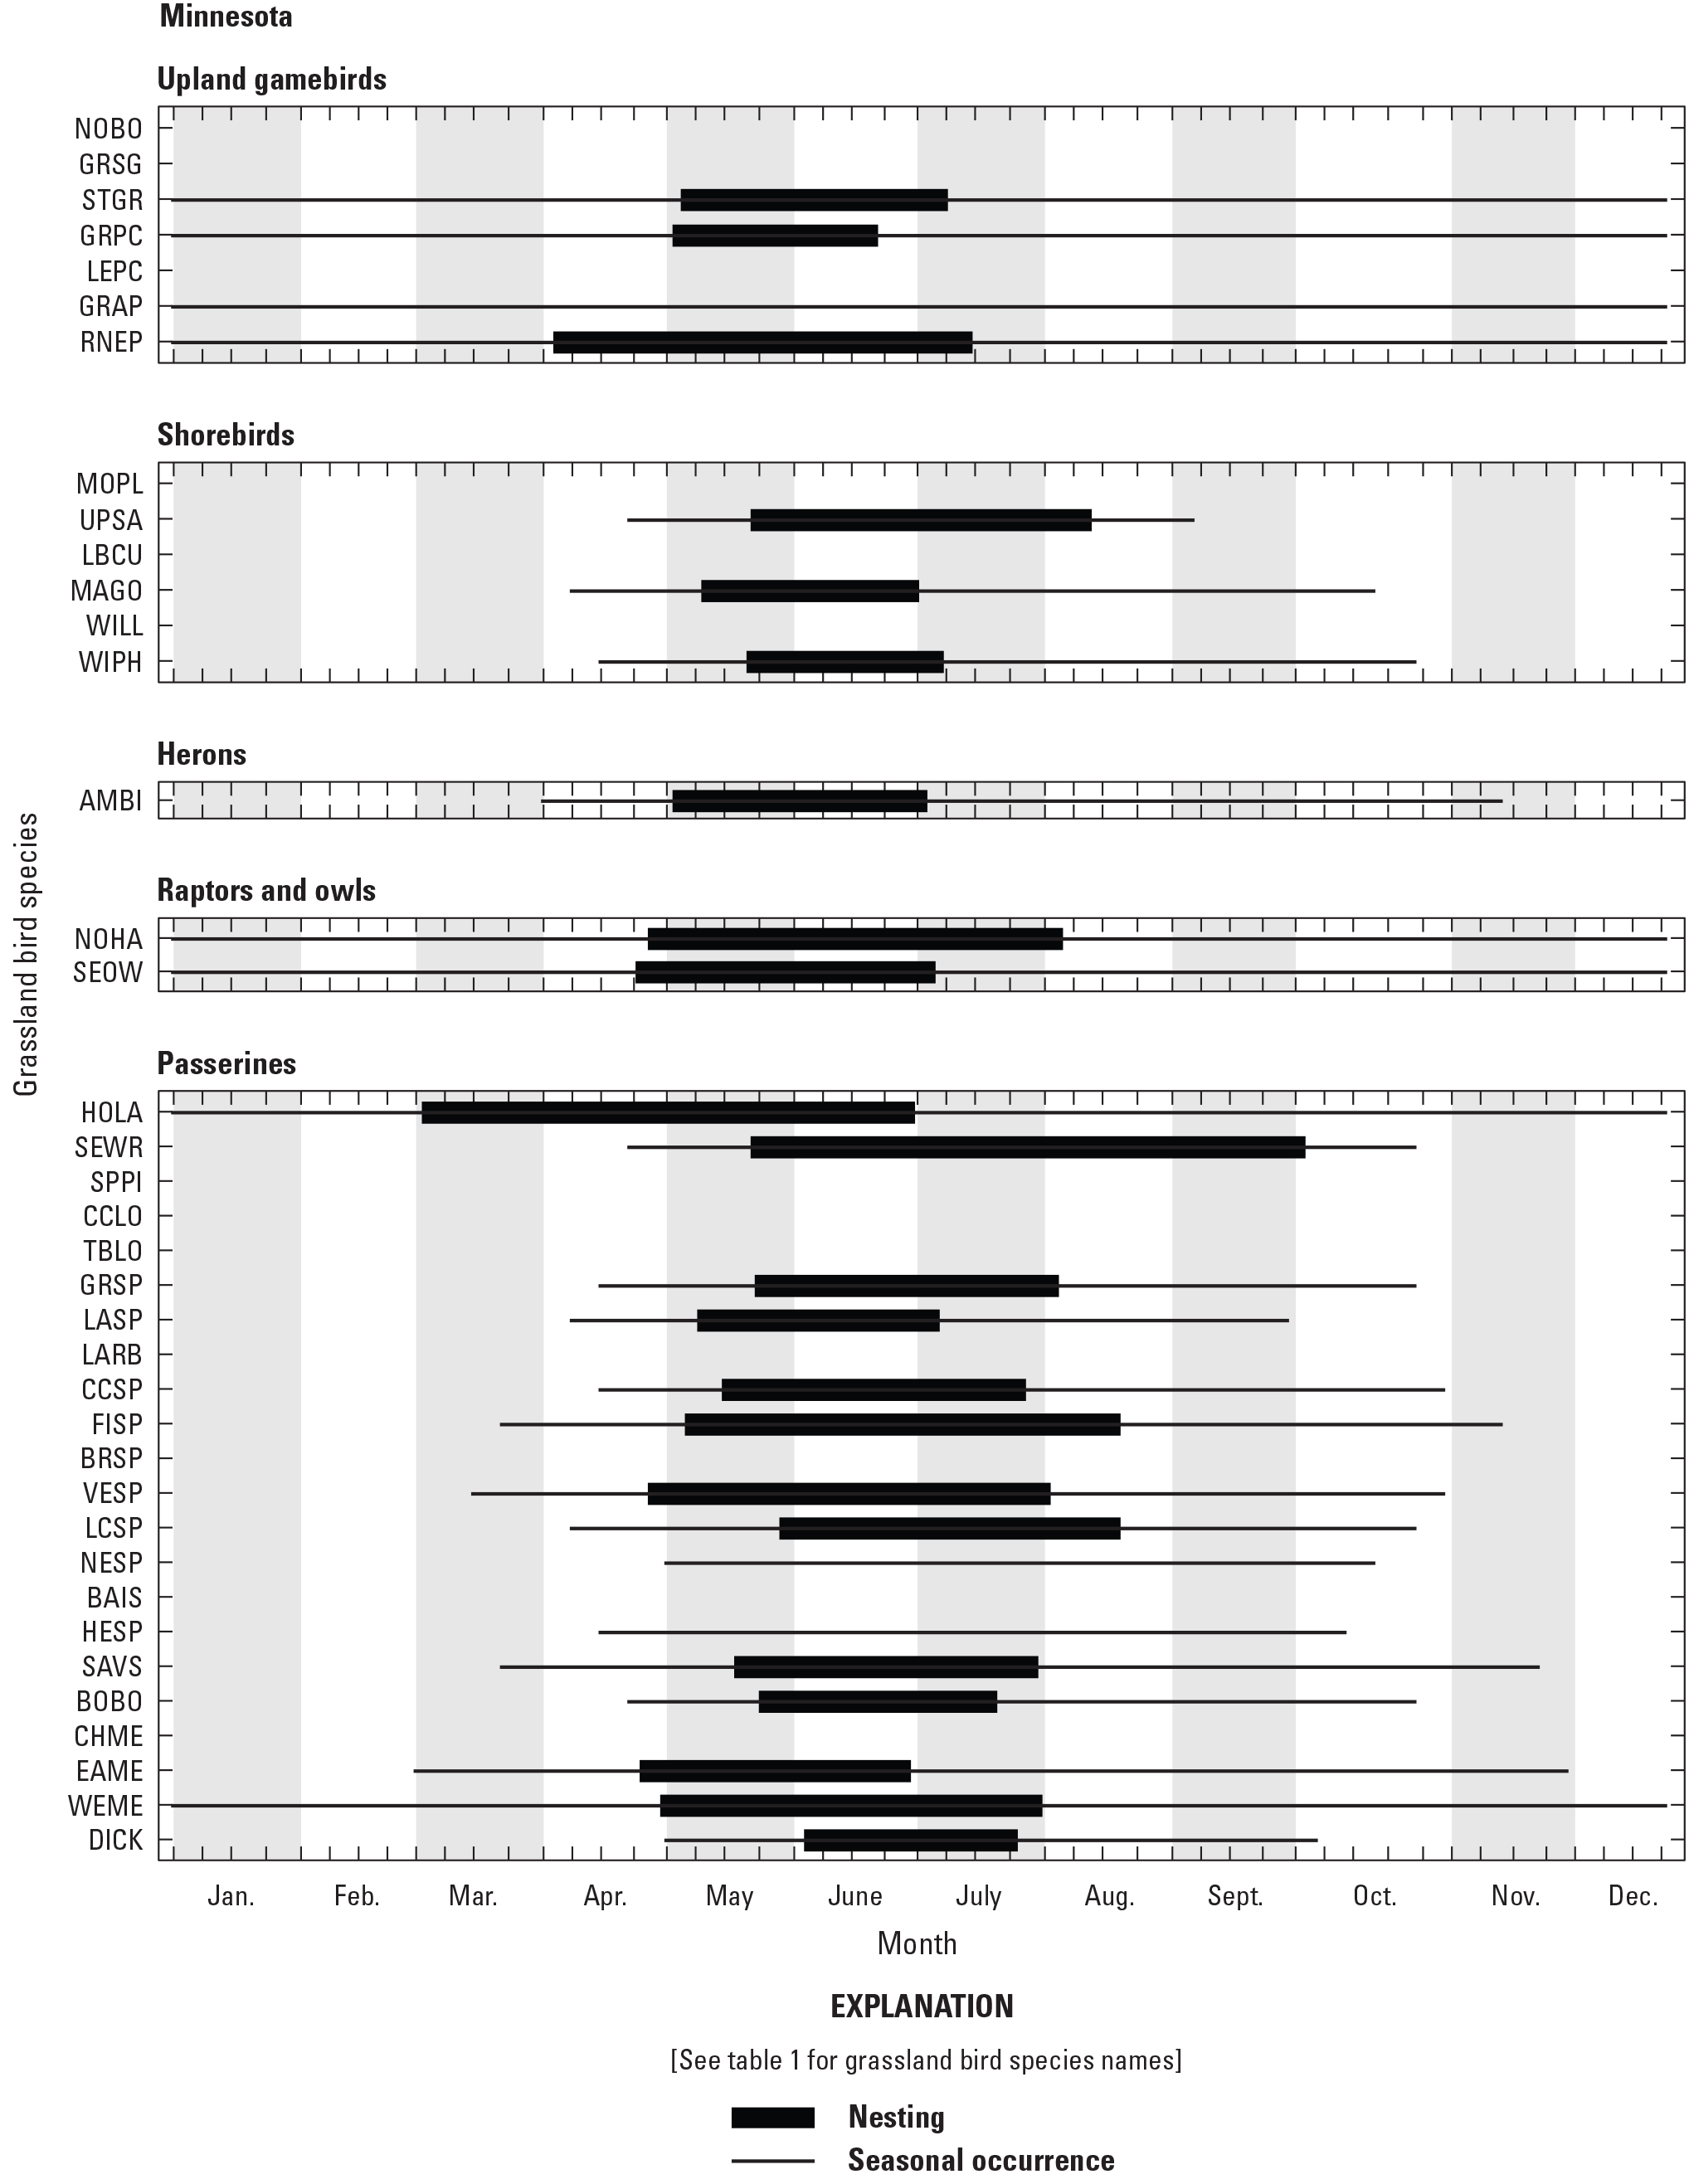 Figure showing seasonal occurrence and nesting phenology for 38 grassland bird species
               in Minnesota, United States.